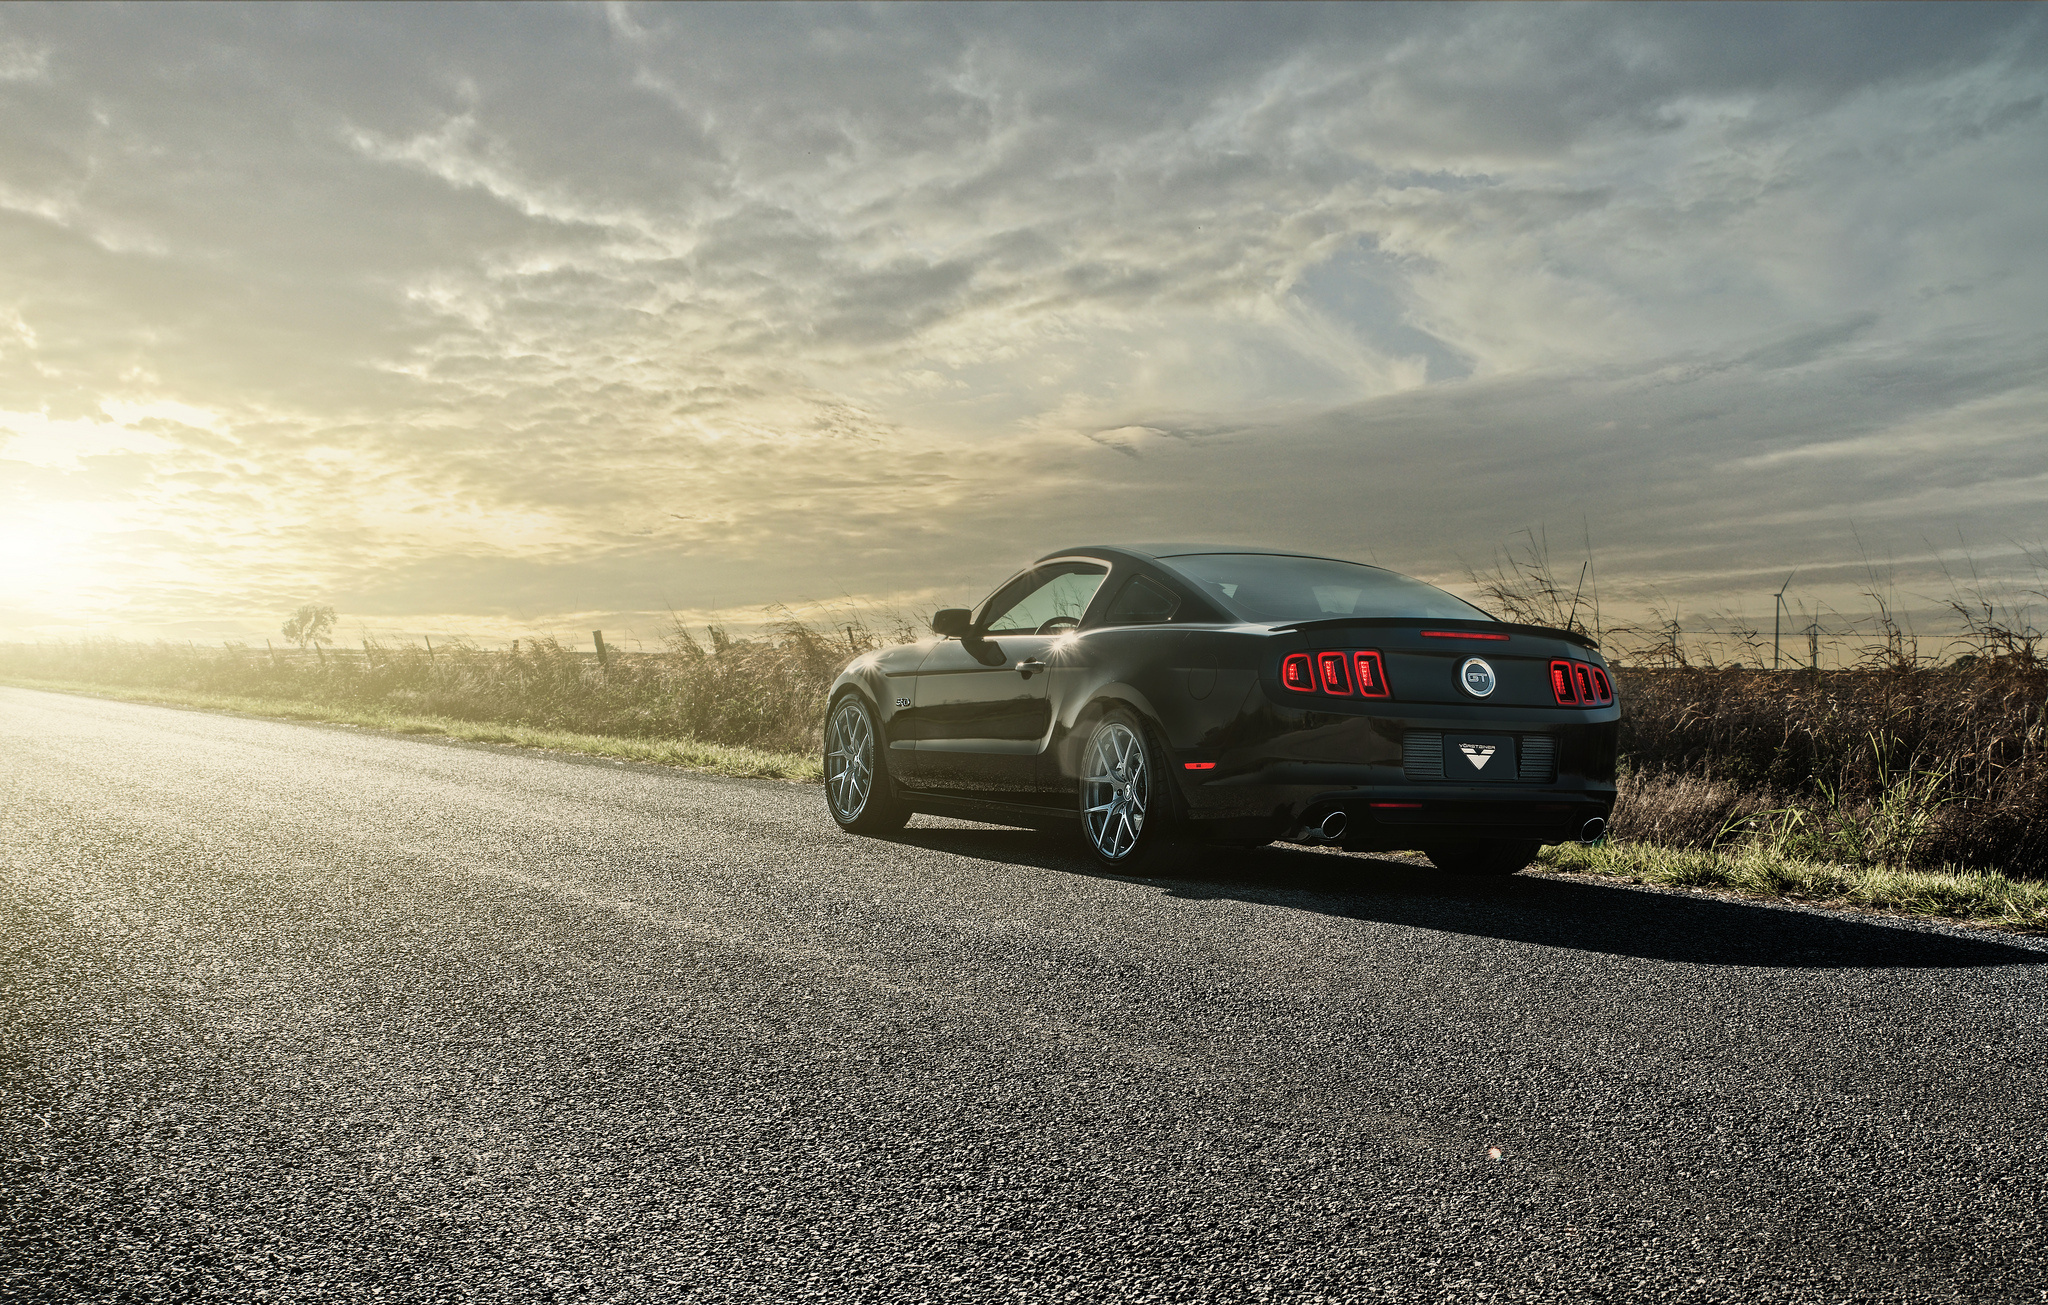 1920 x 1080 picture auto, mustang, cars, shine, light, road, back view, rear view, gt